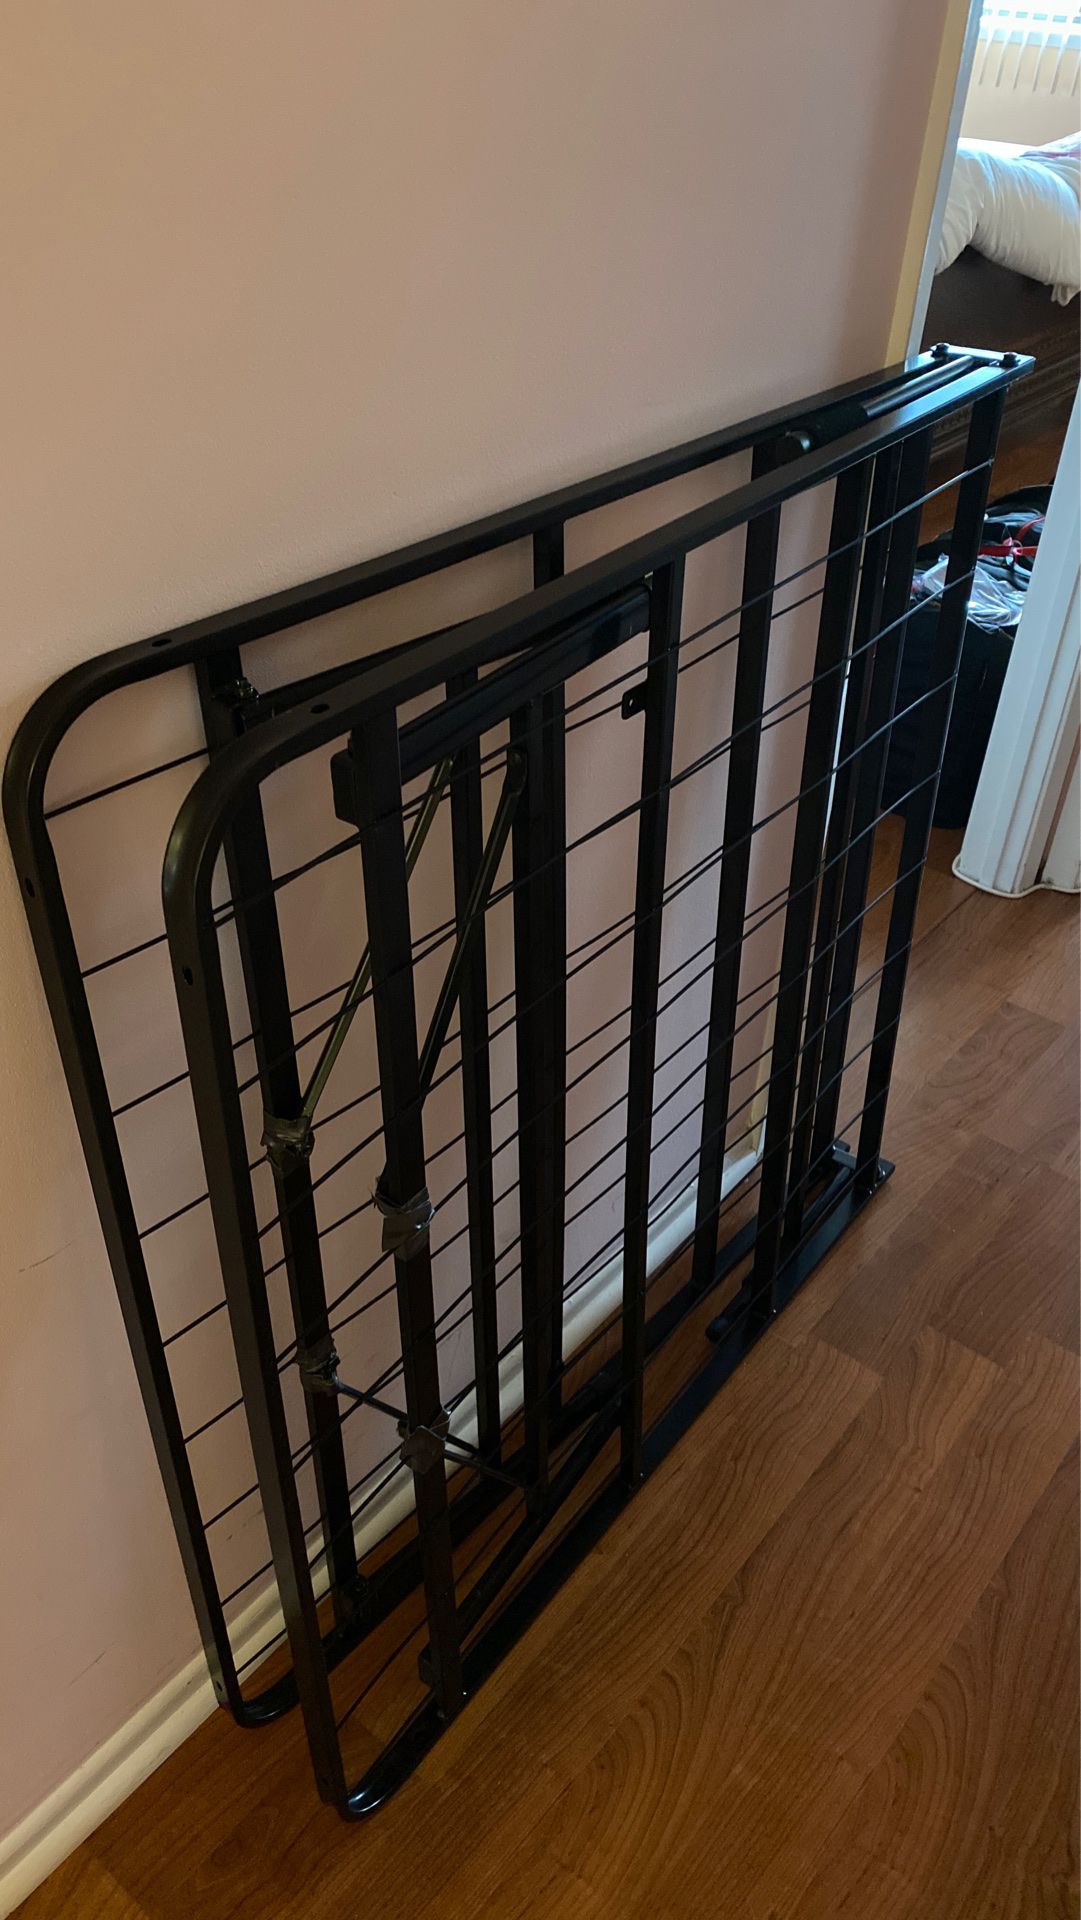 FREE foldable metal bed frame